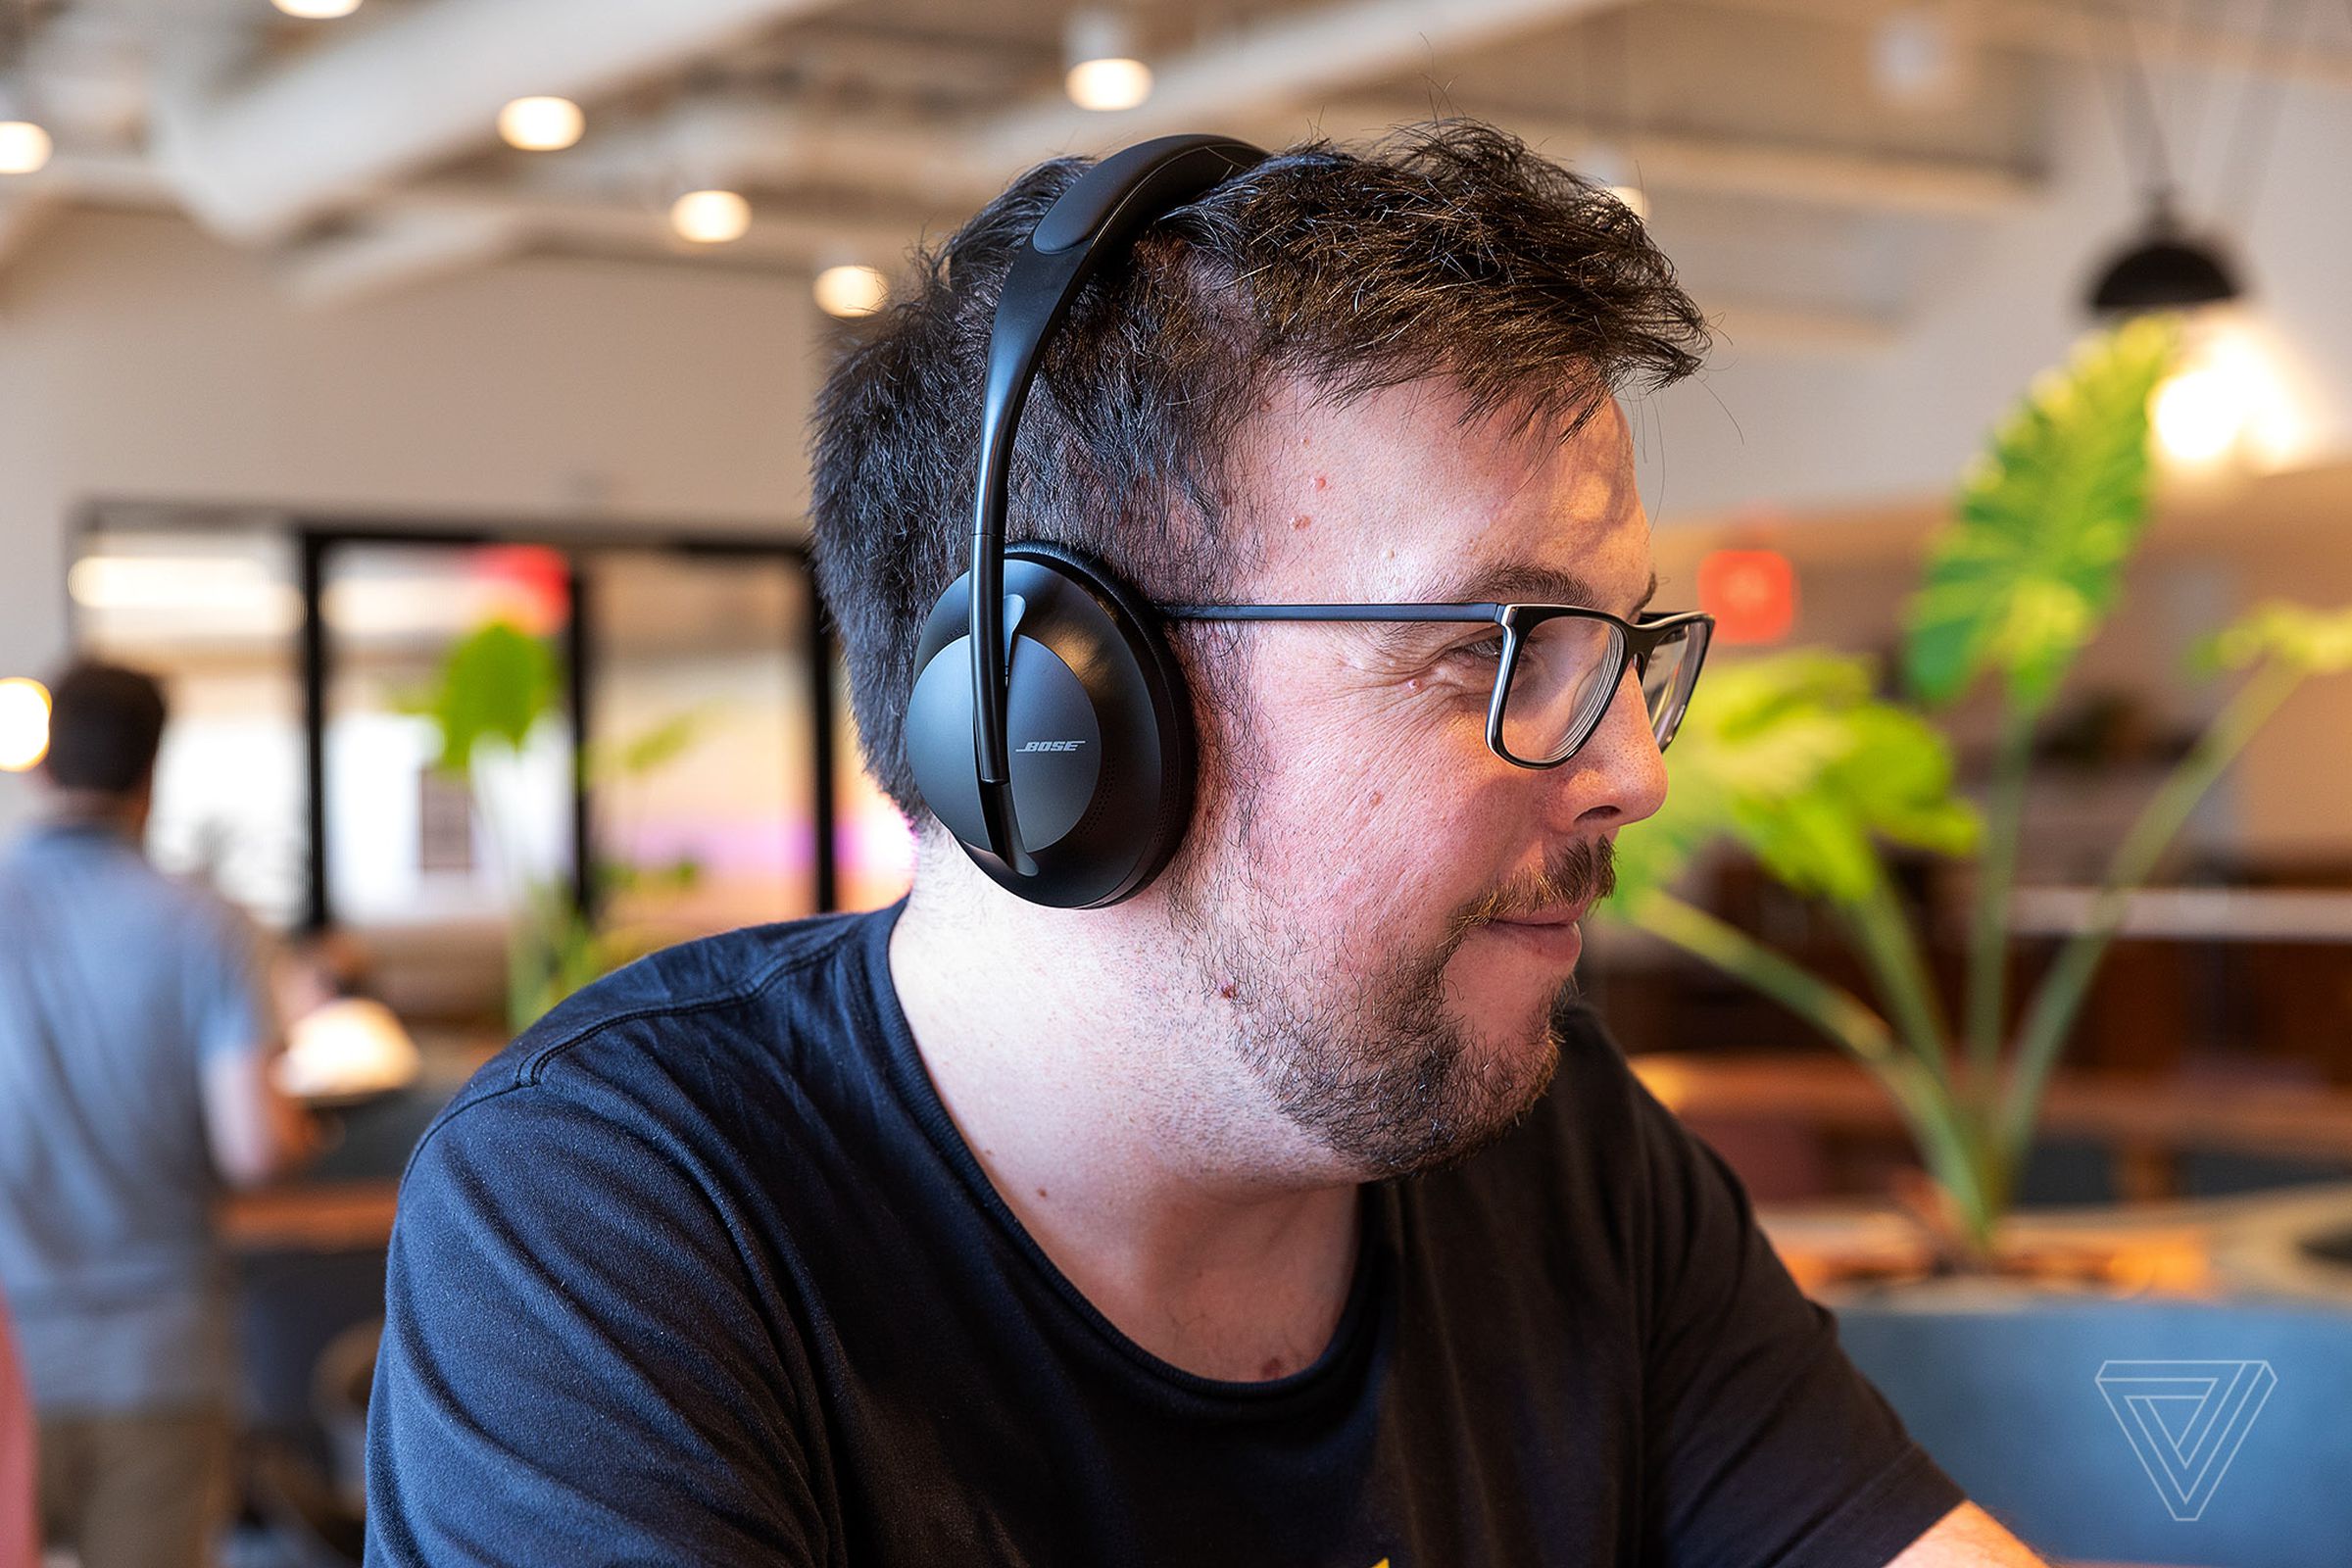 That’s The Verge’s Chris Welch wearing Bose’s Noise Canceling Headphones 700